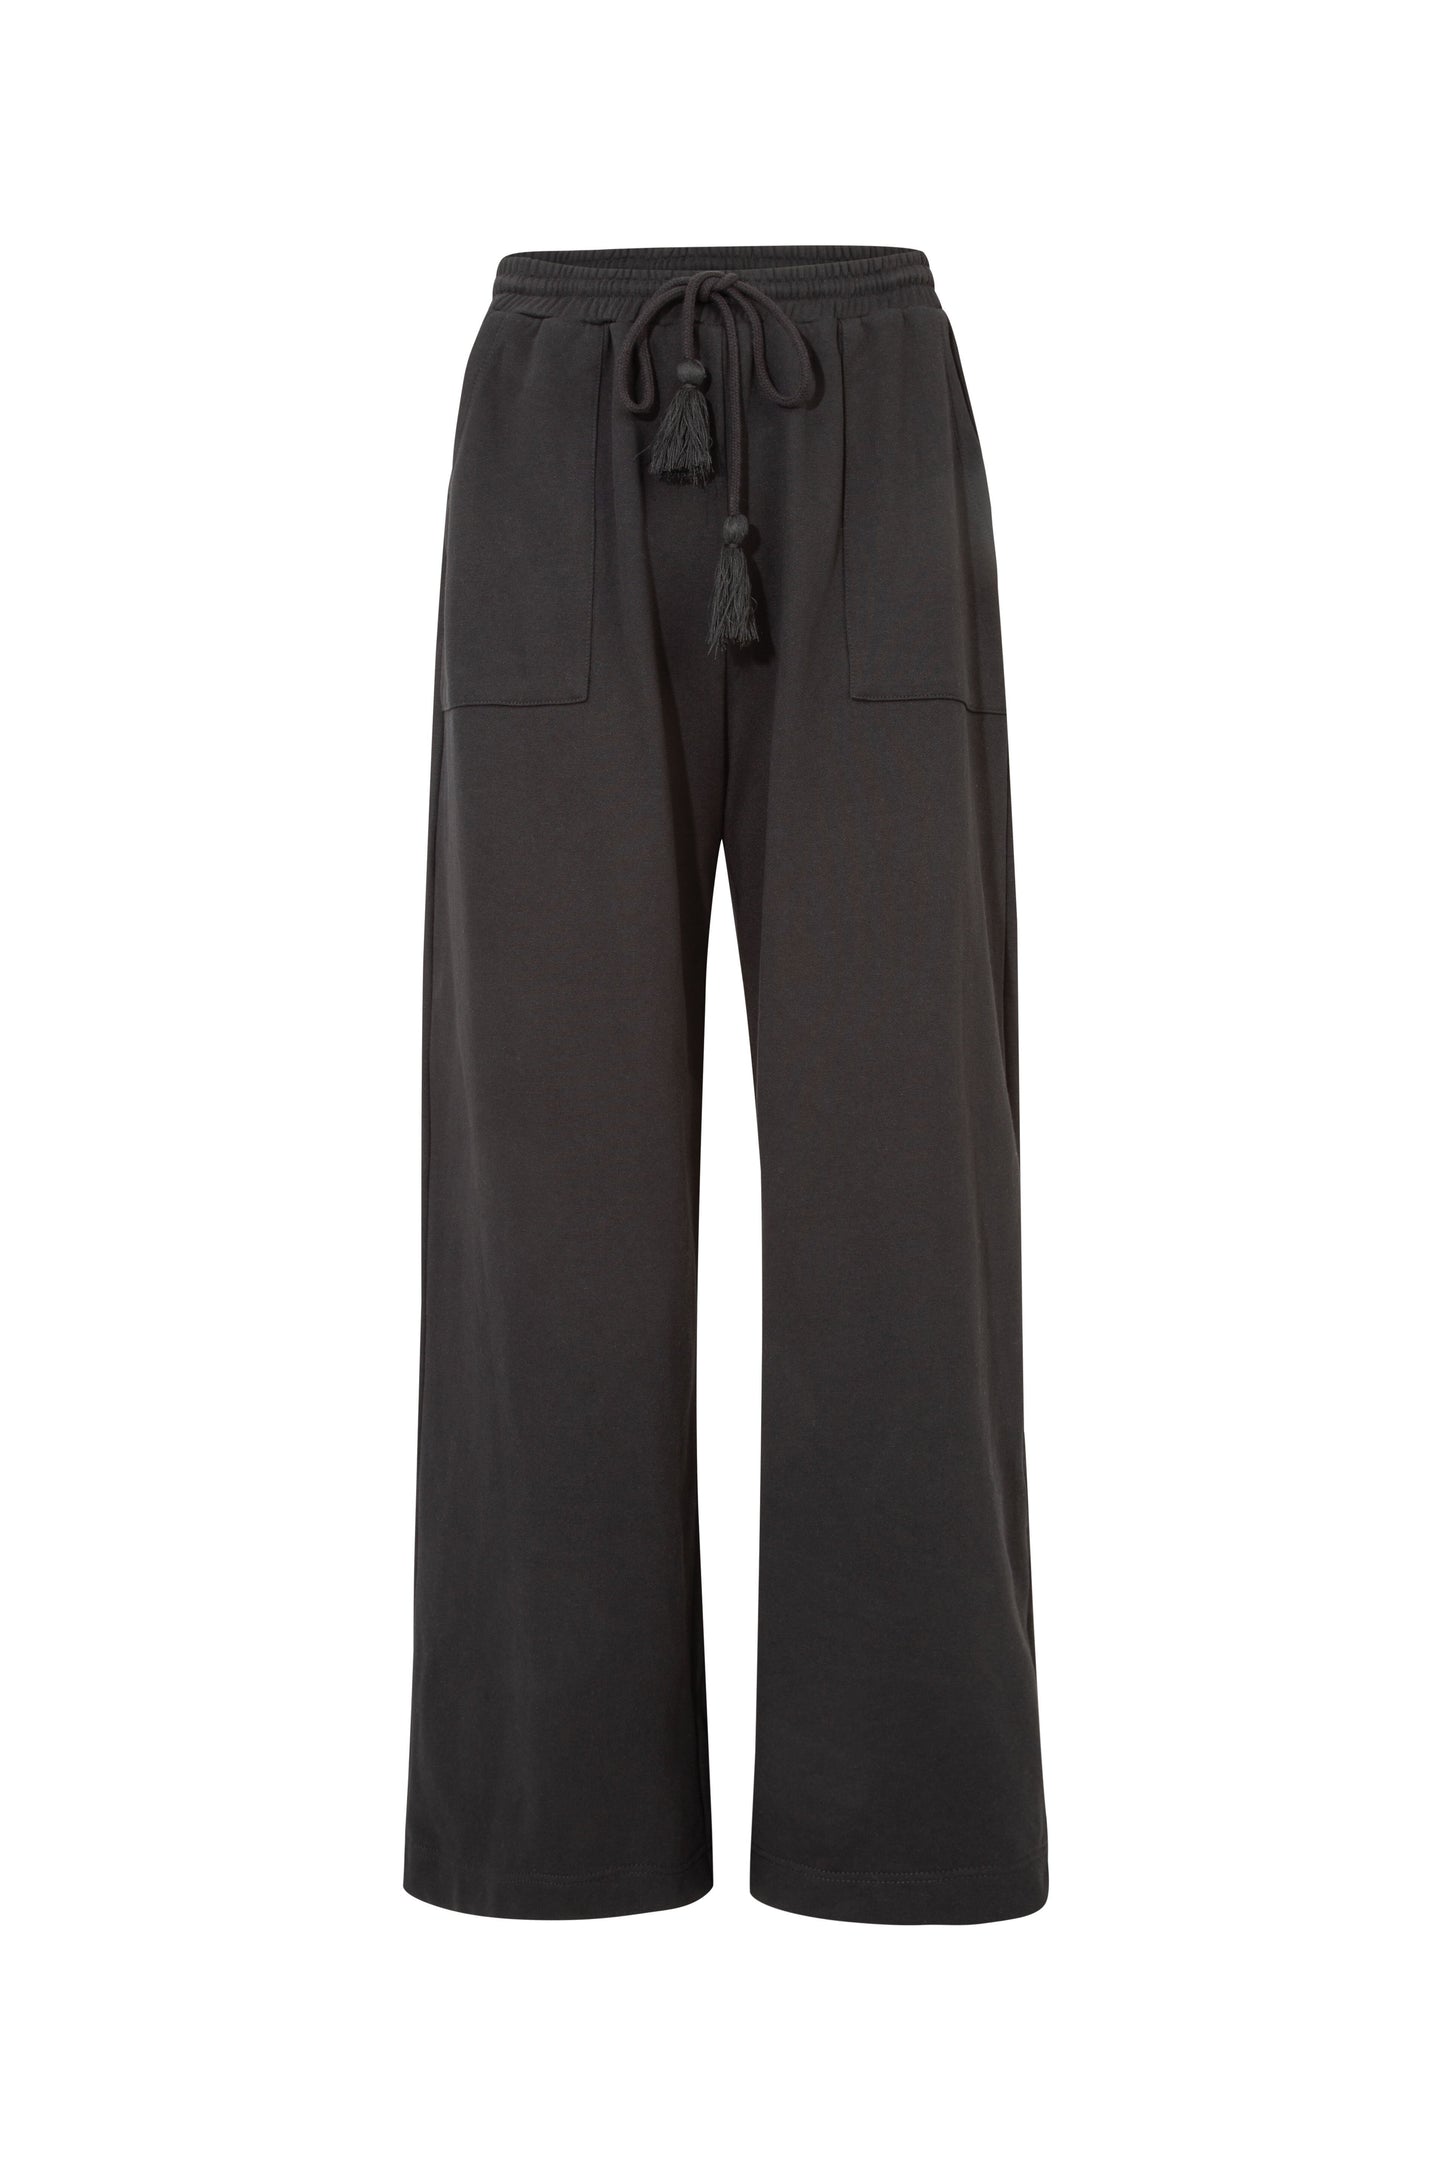 CURATE LONG STRETCH PANT - BLACK - THE VOGUE STORE